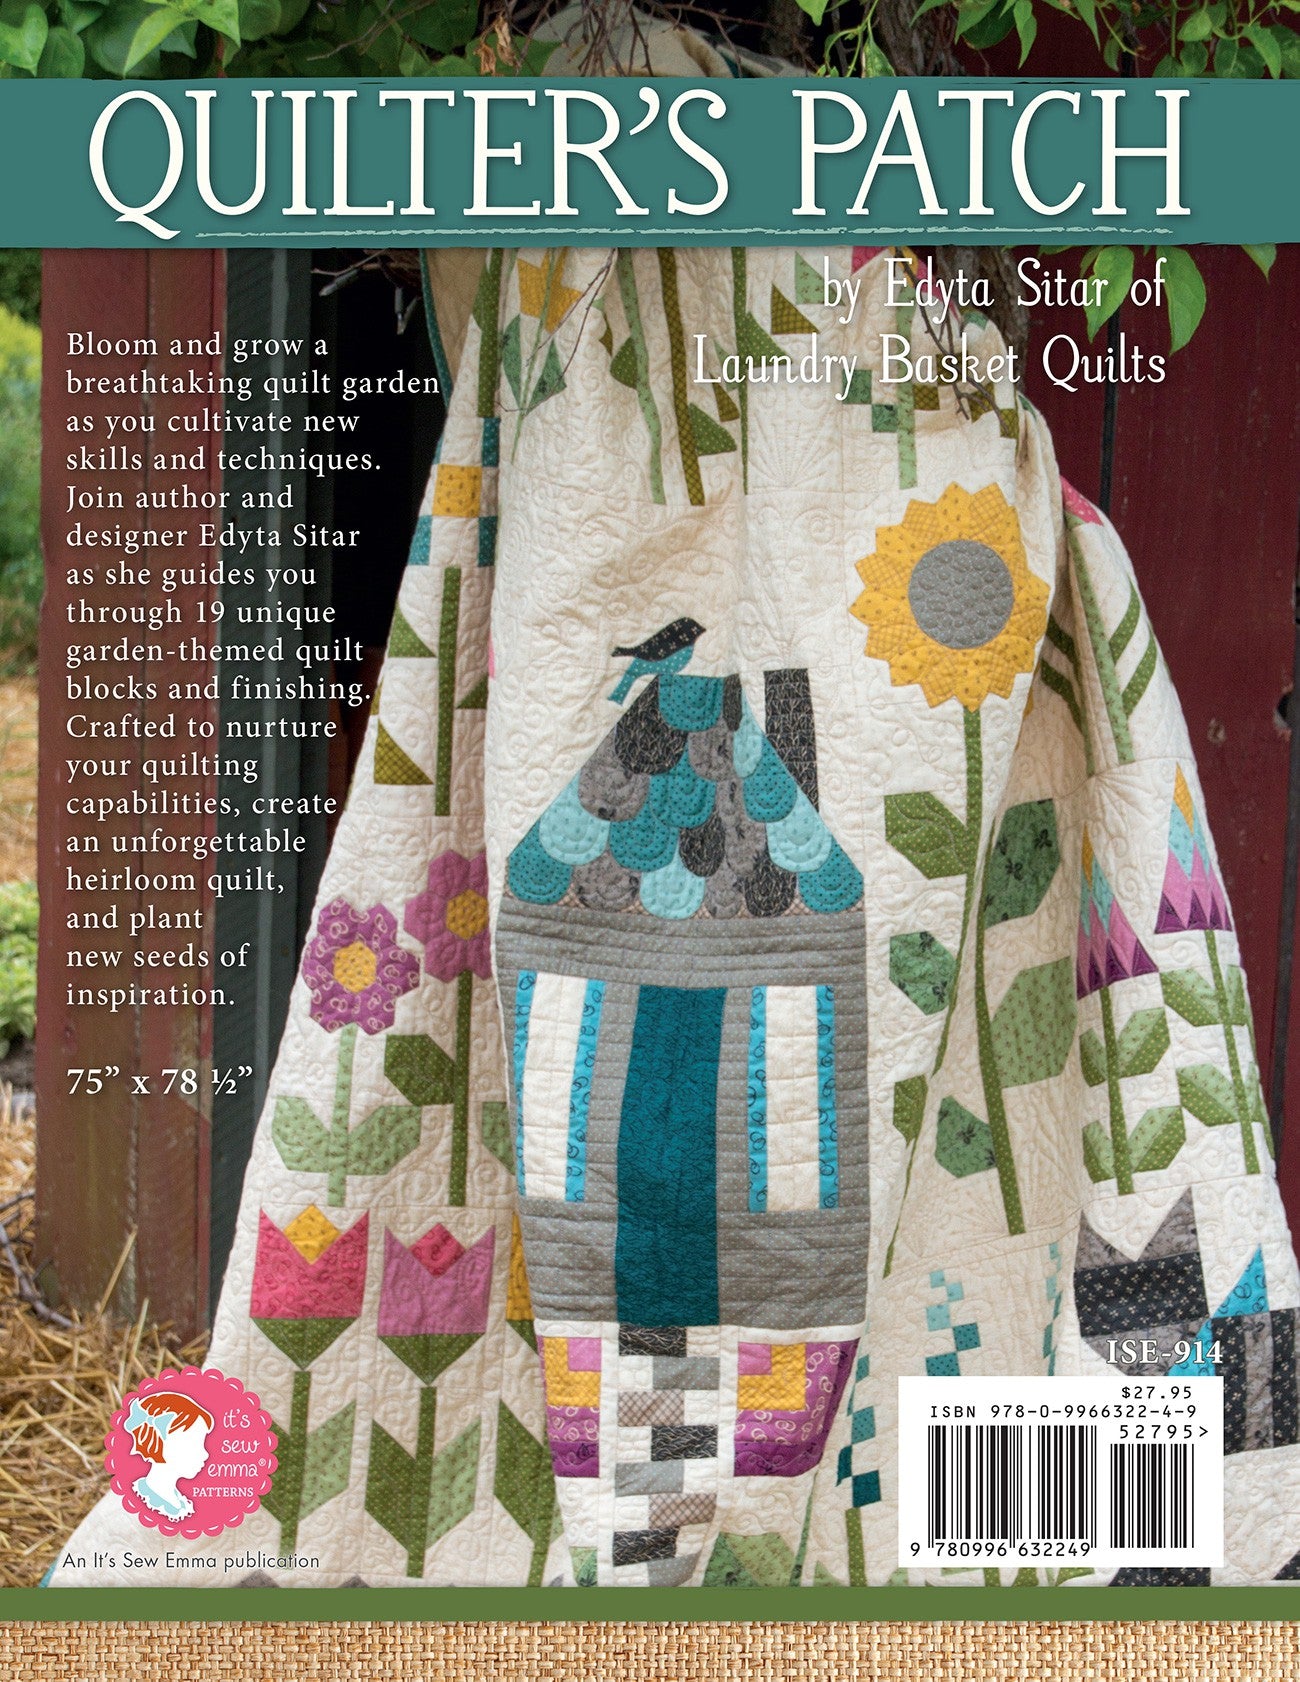 Quilter's Patch Quilt Book by Edyta Sitar of Laundry Basket Quilts